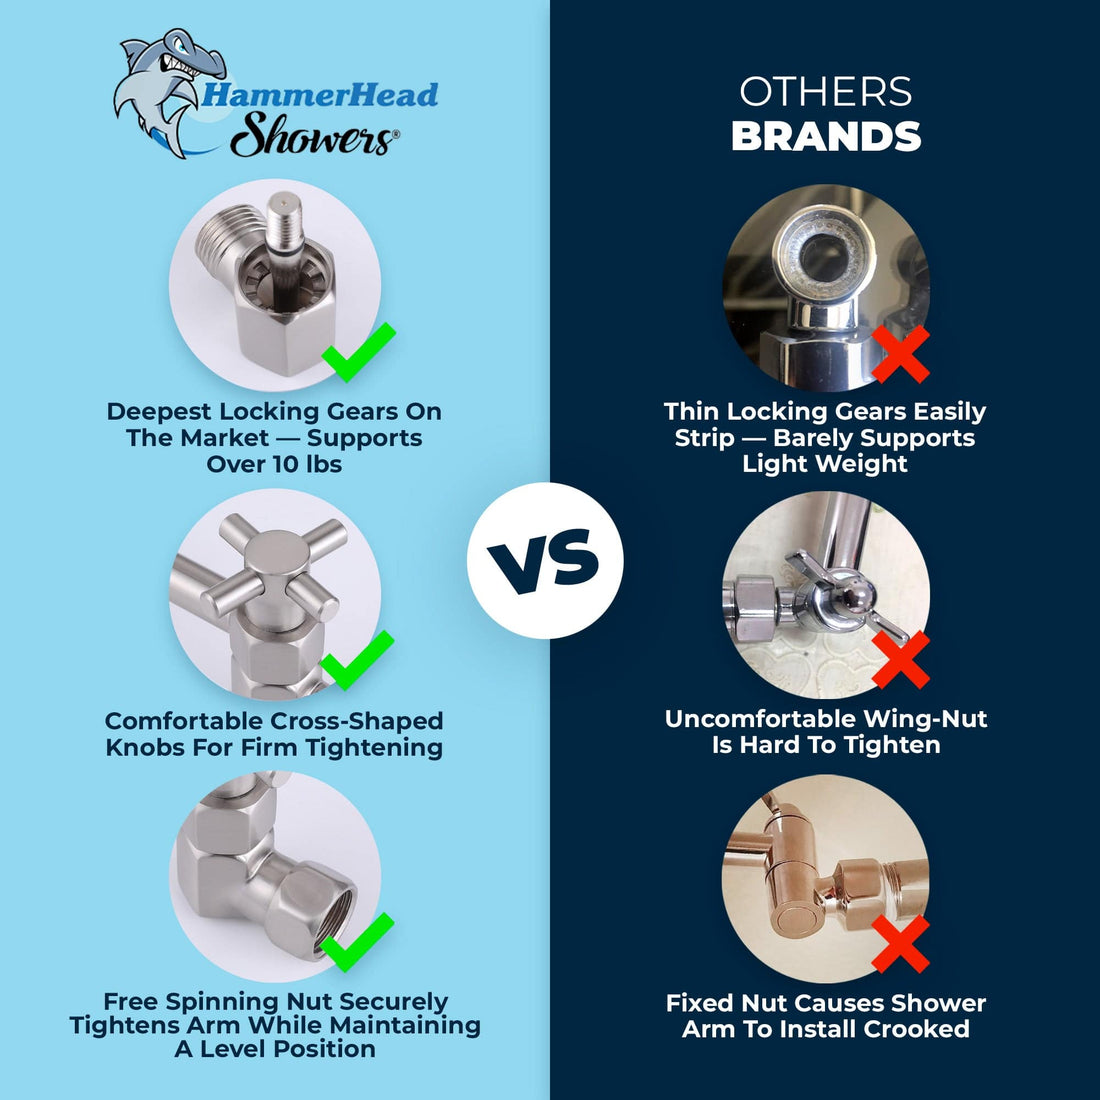 Brushed Nickel / 12 Inch HammerHead Showers Adjustable Shower Arm versus The Competition — The Shower Head Store